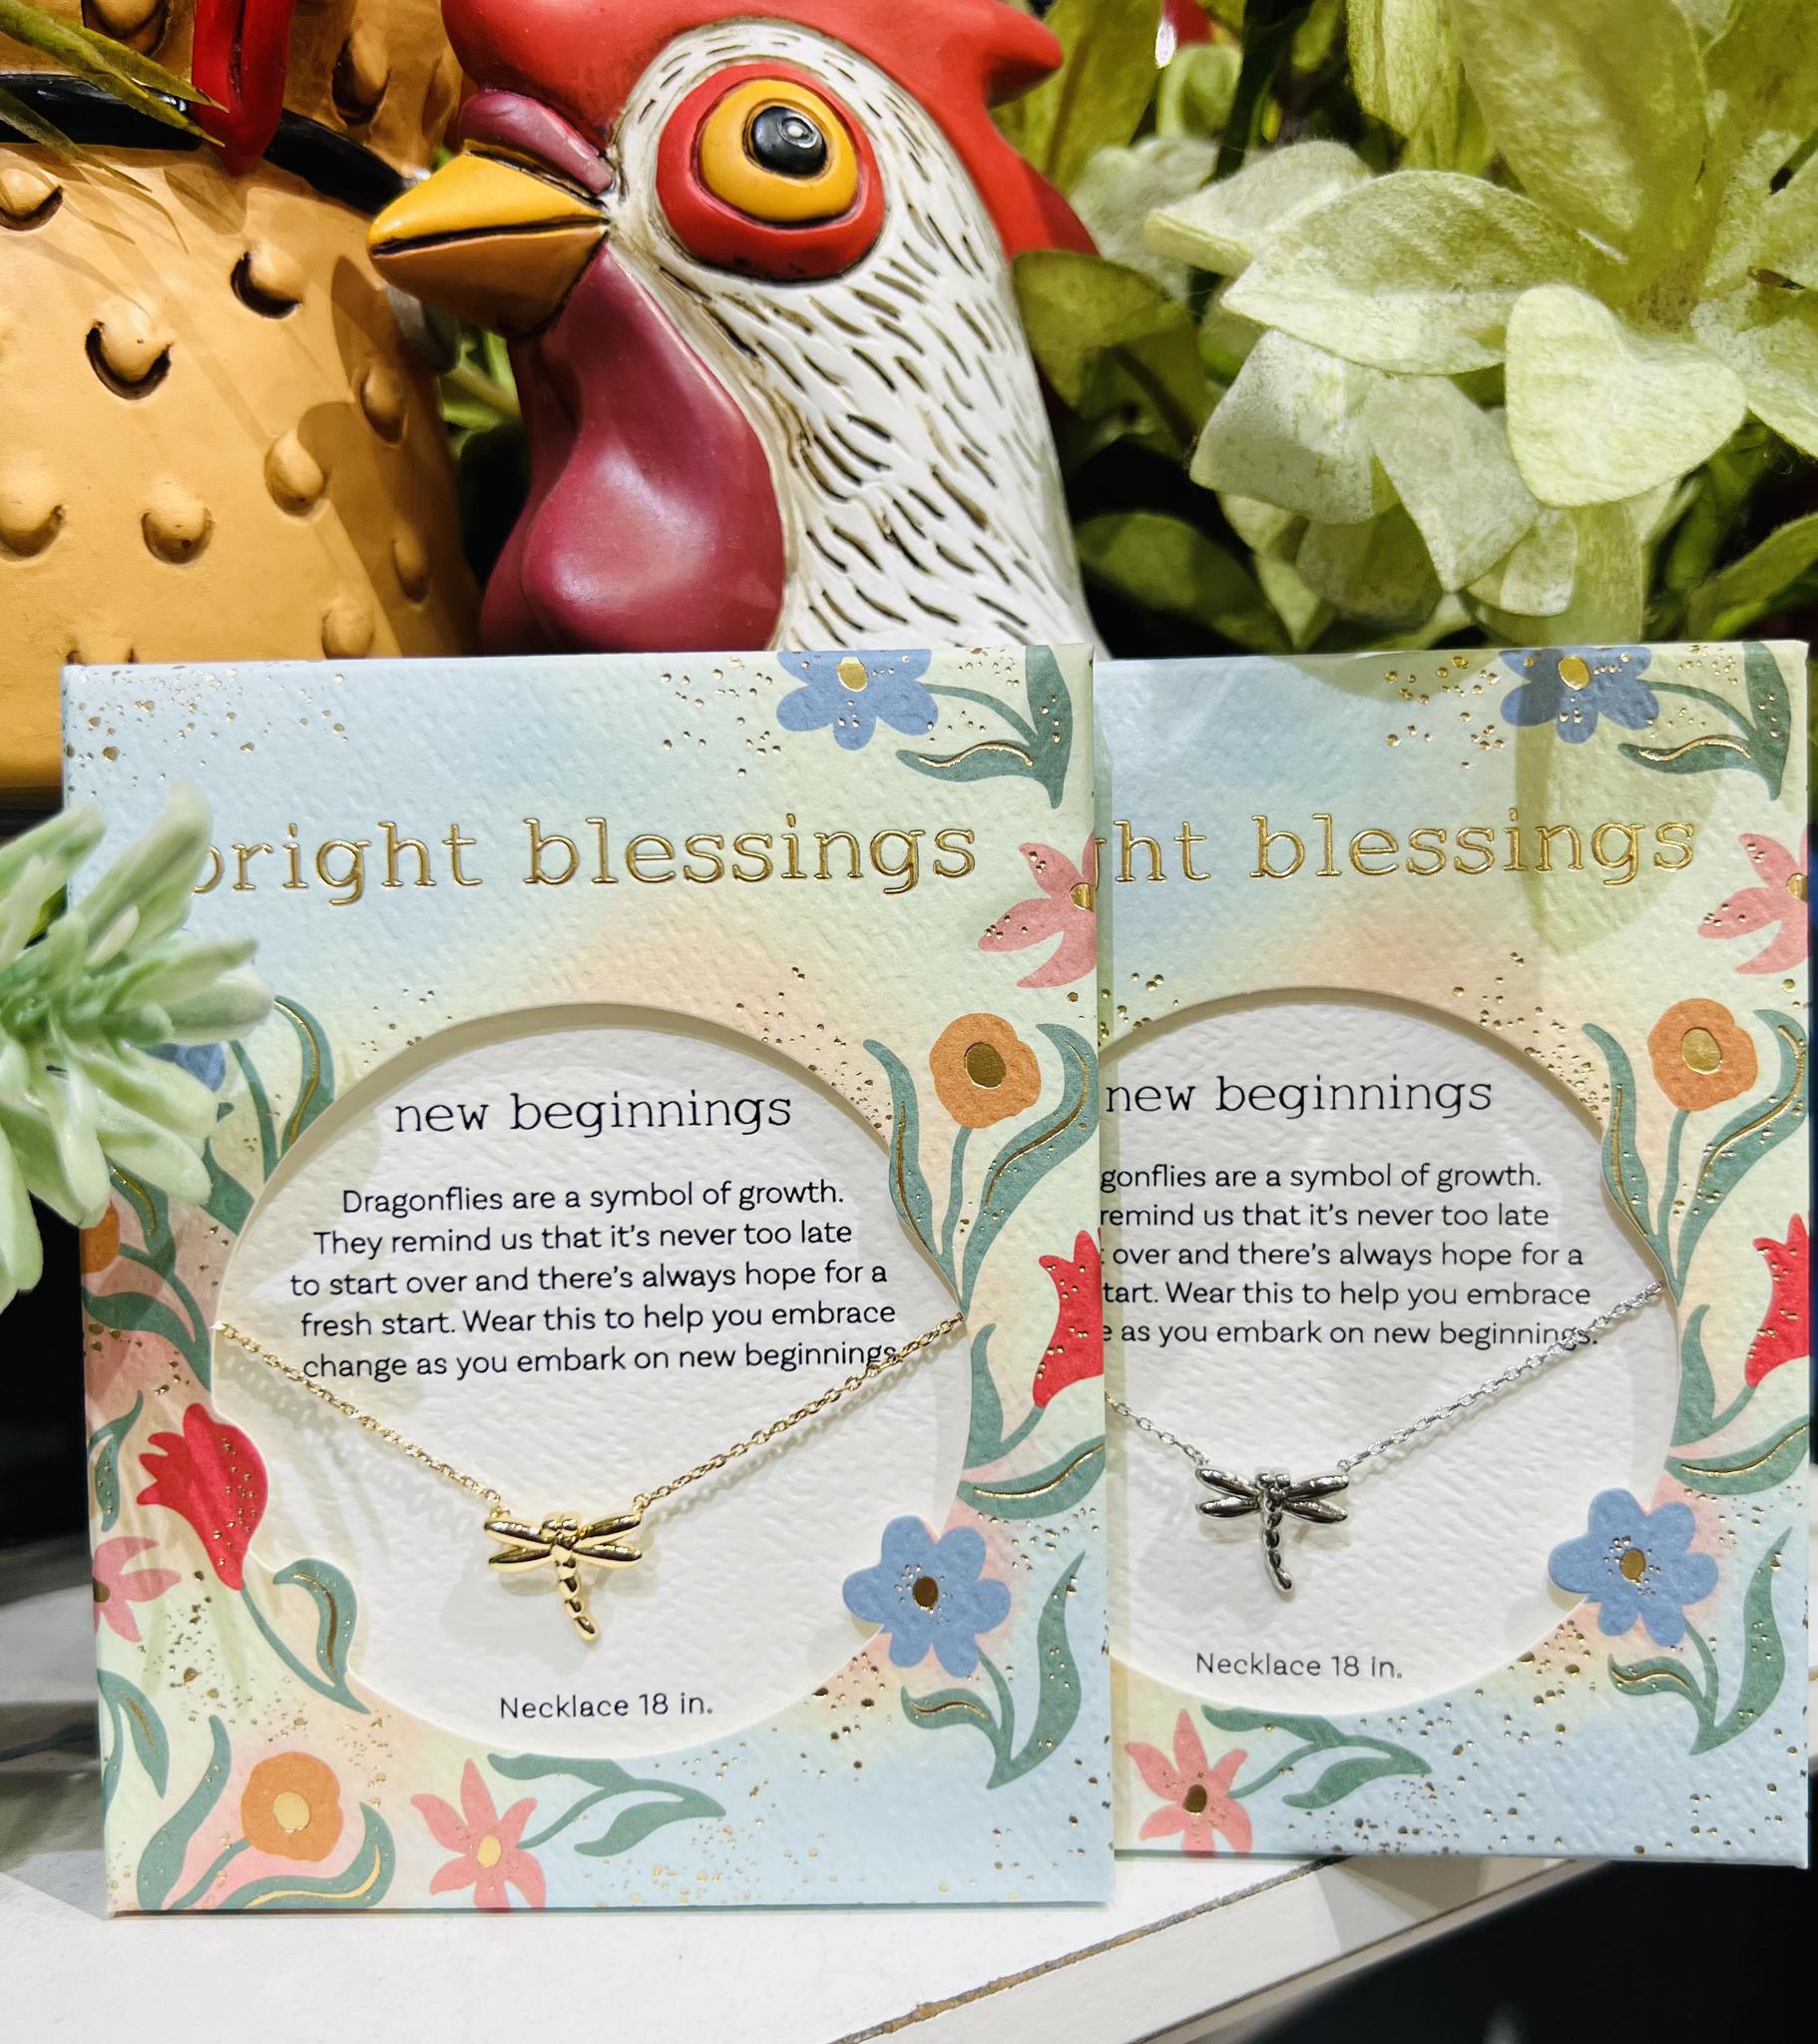 Bright Blessings New Beginnings Necklace